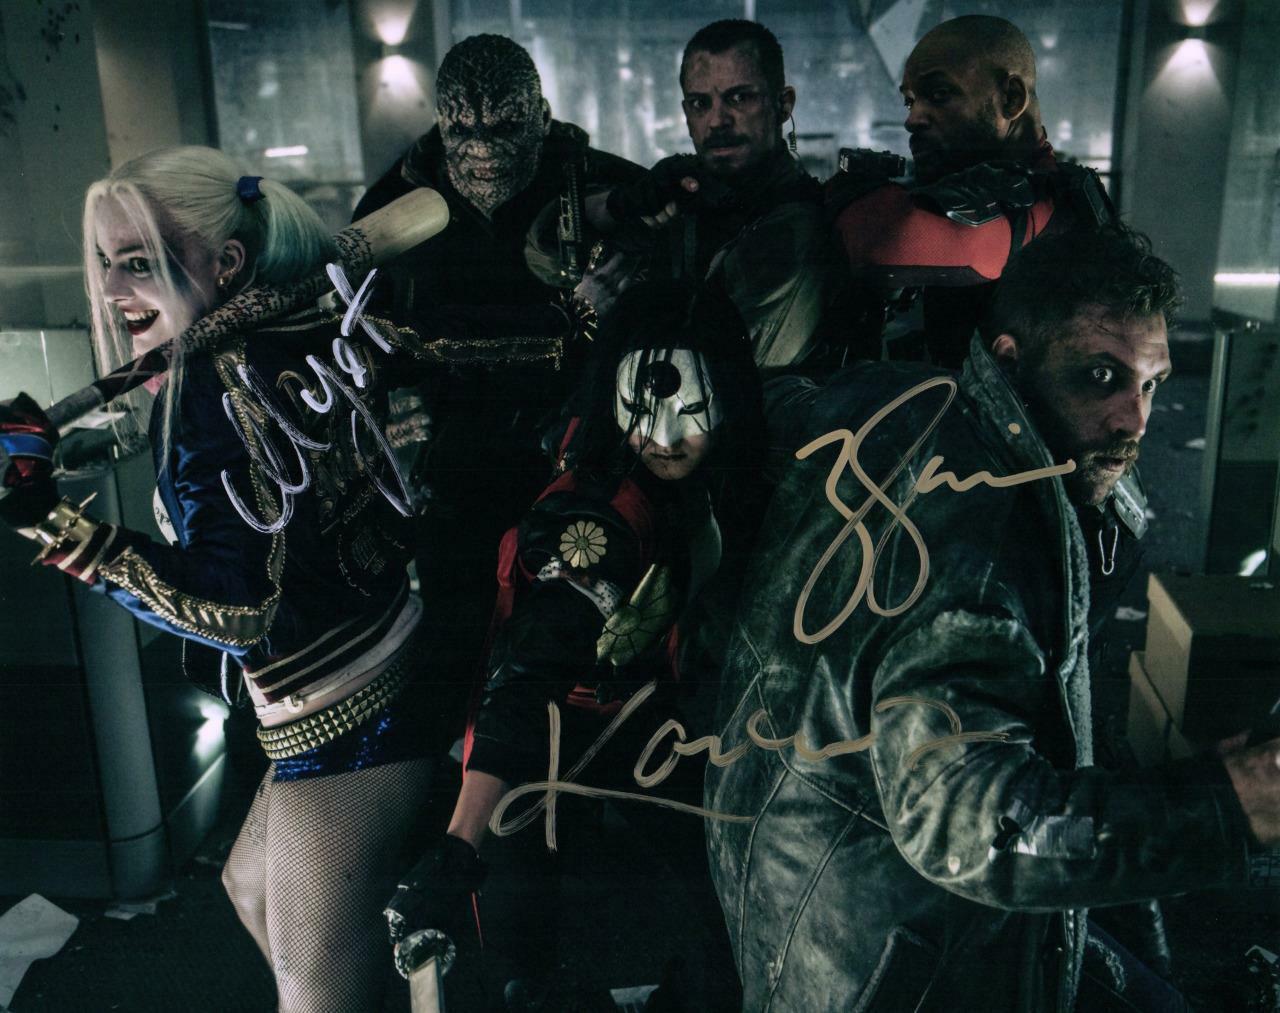 Will Smith Margot Robbie Karen Fukuhara 8x10 Signed Autographed Photo Poster painting PictureCOA